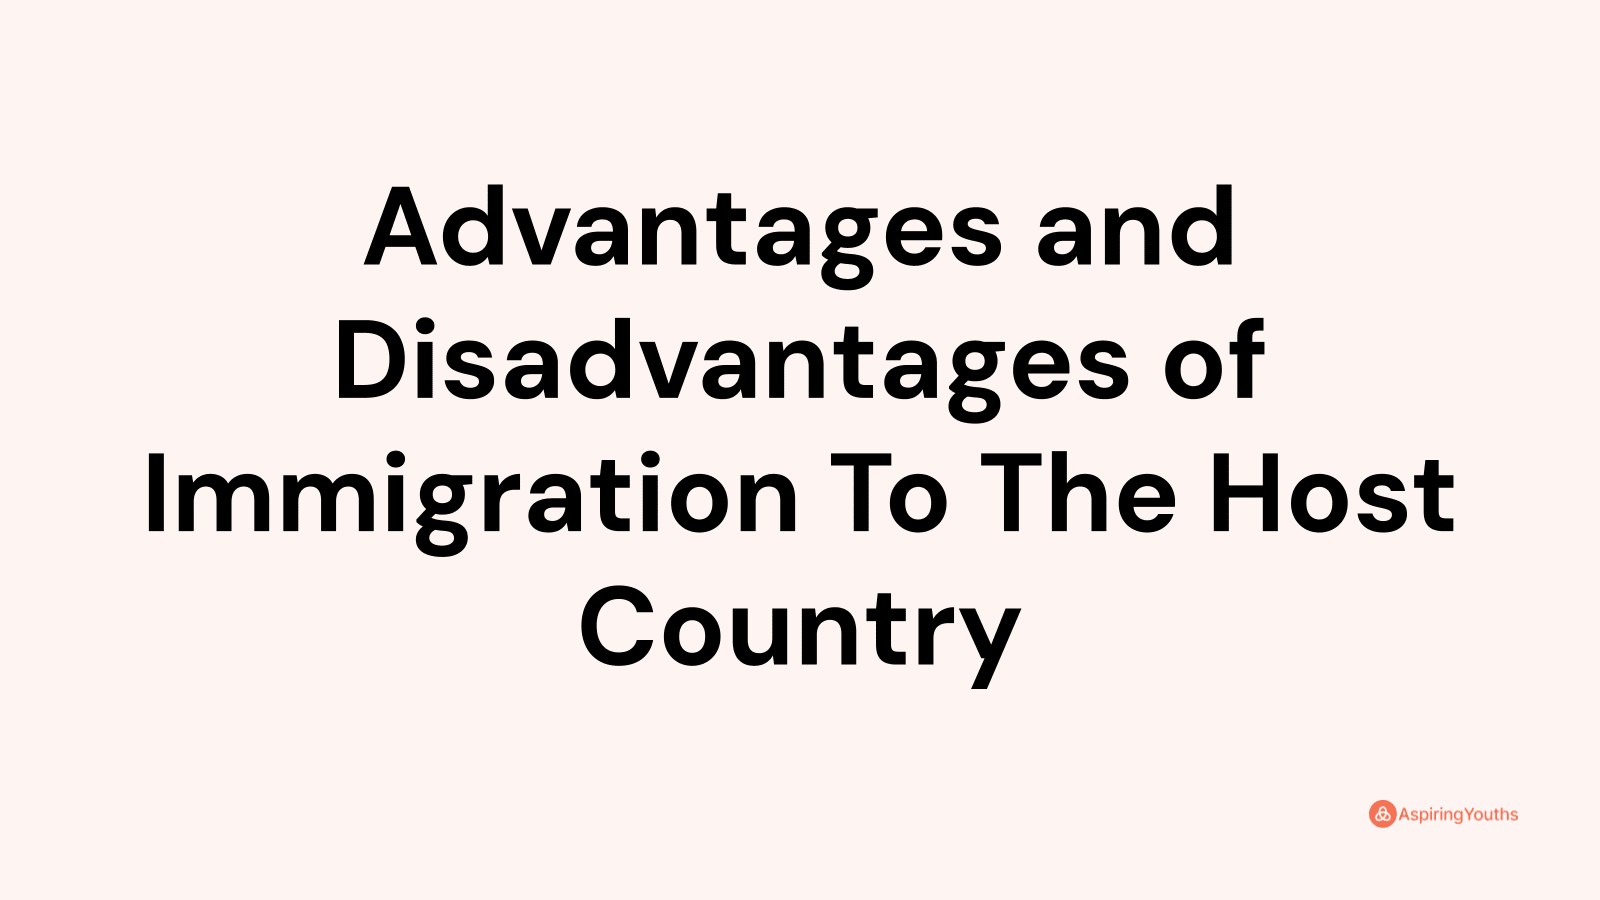 Advantages and disadvantages of Immigration To The Host Country